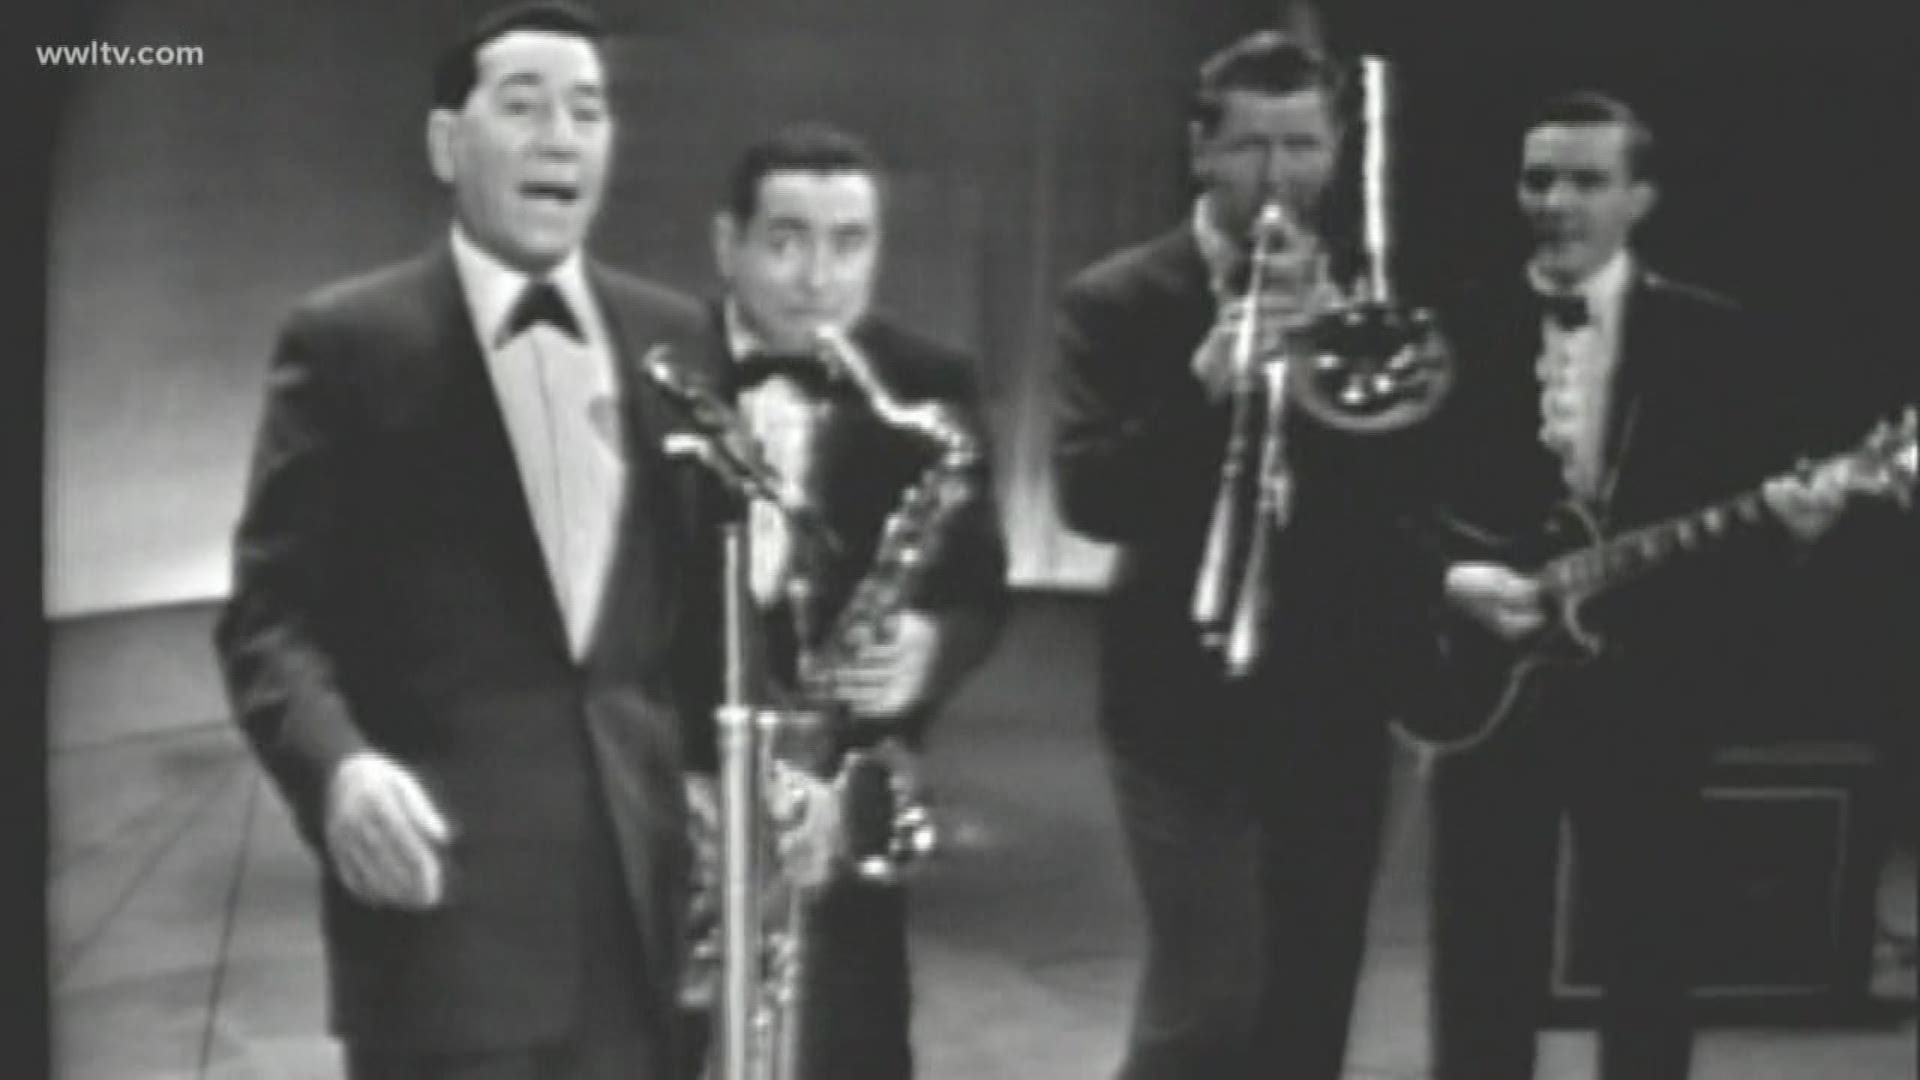 We are talking about the new exhibit at the Jazz Museum that focuses on New Orleans native Louis Prima.